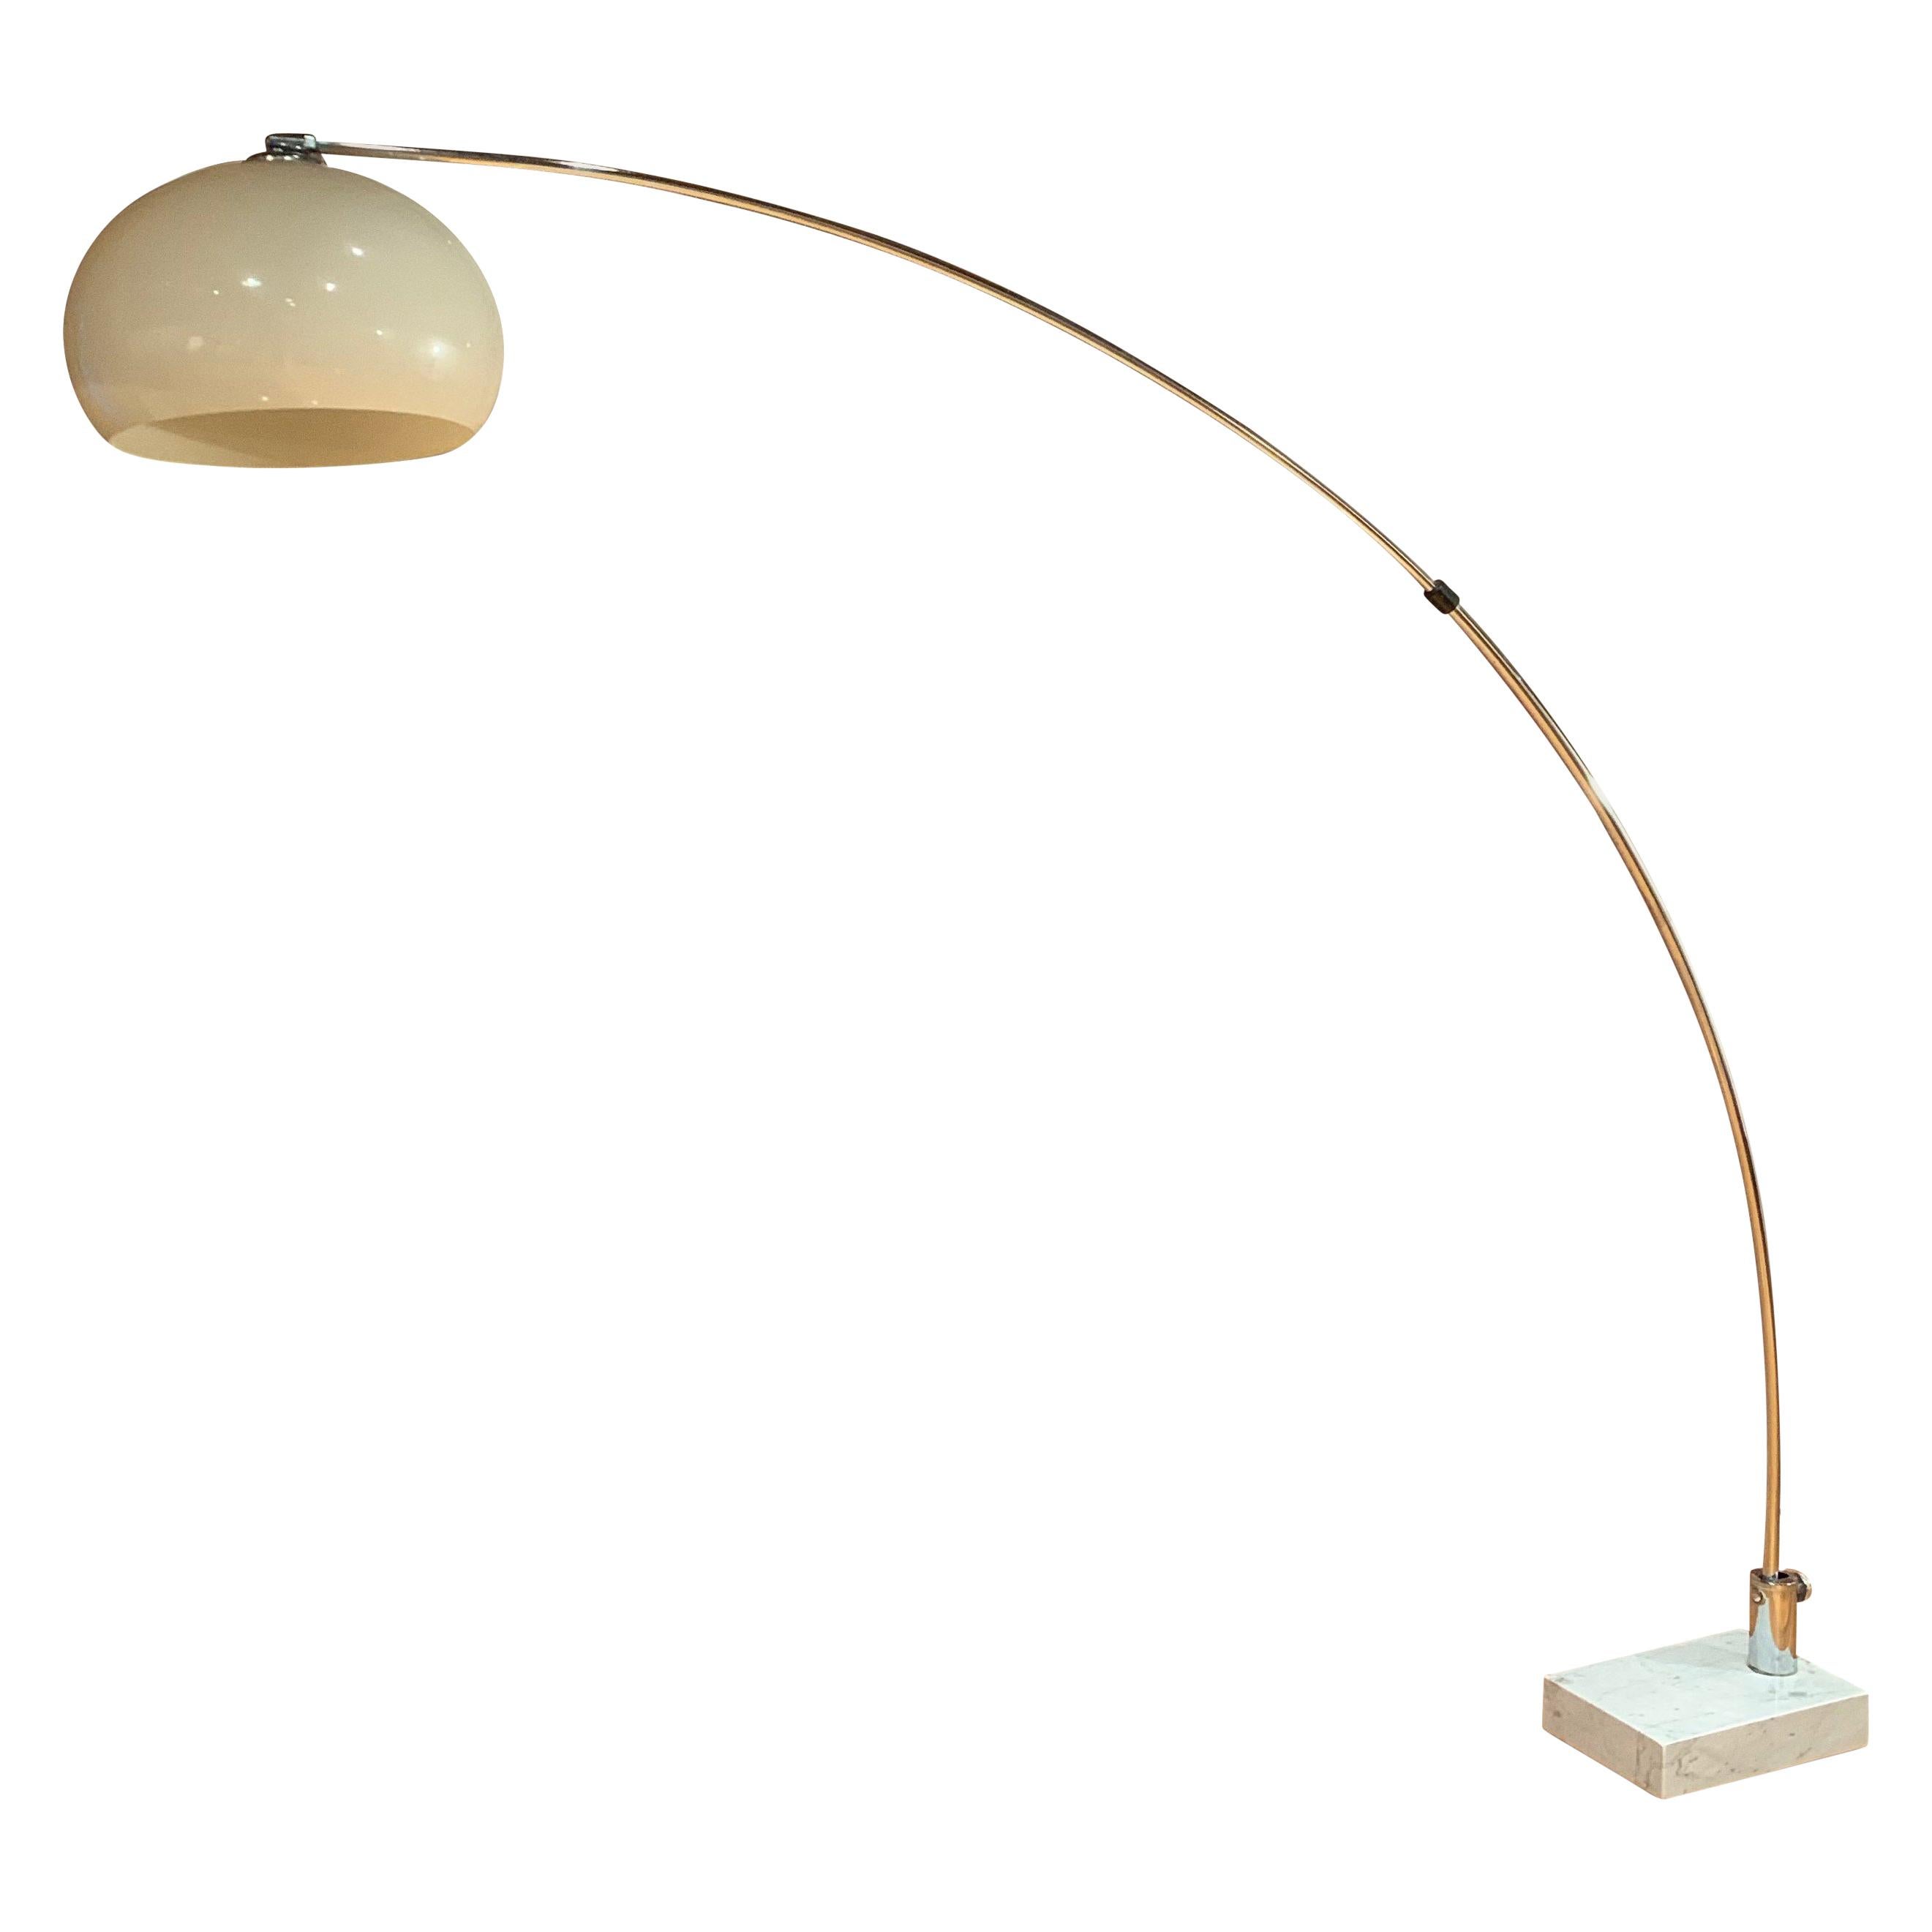 Midcentury Arc Floor Lamp in Chrome with Carrera Marble Base Guzzini Style